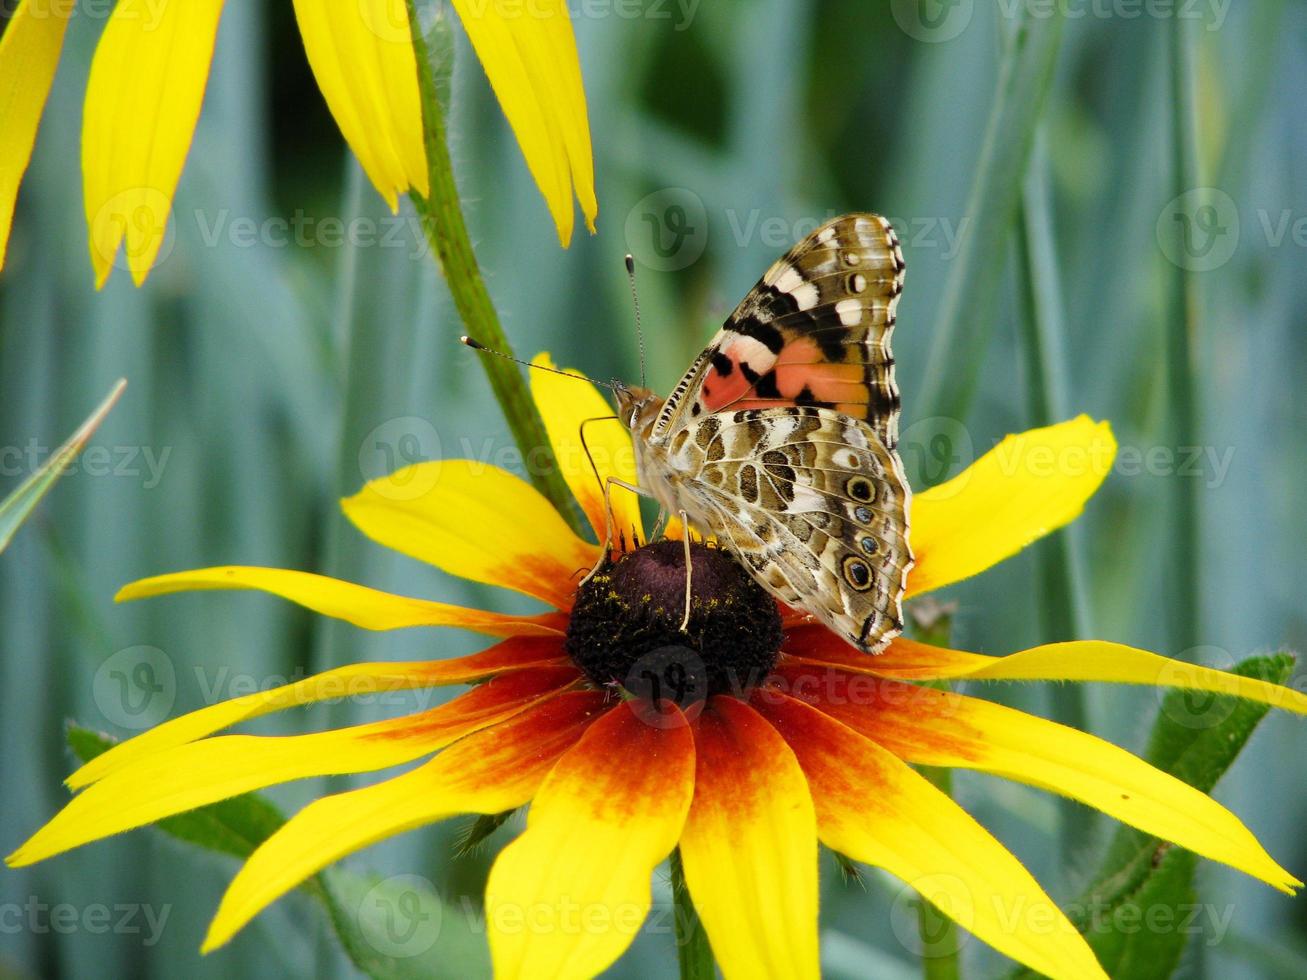 Butterfly Vanessa cardui sits on a flower Rudbeckia and drinks nectar photo